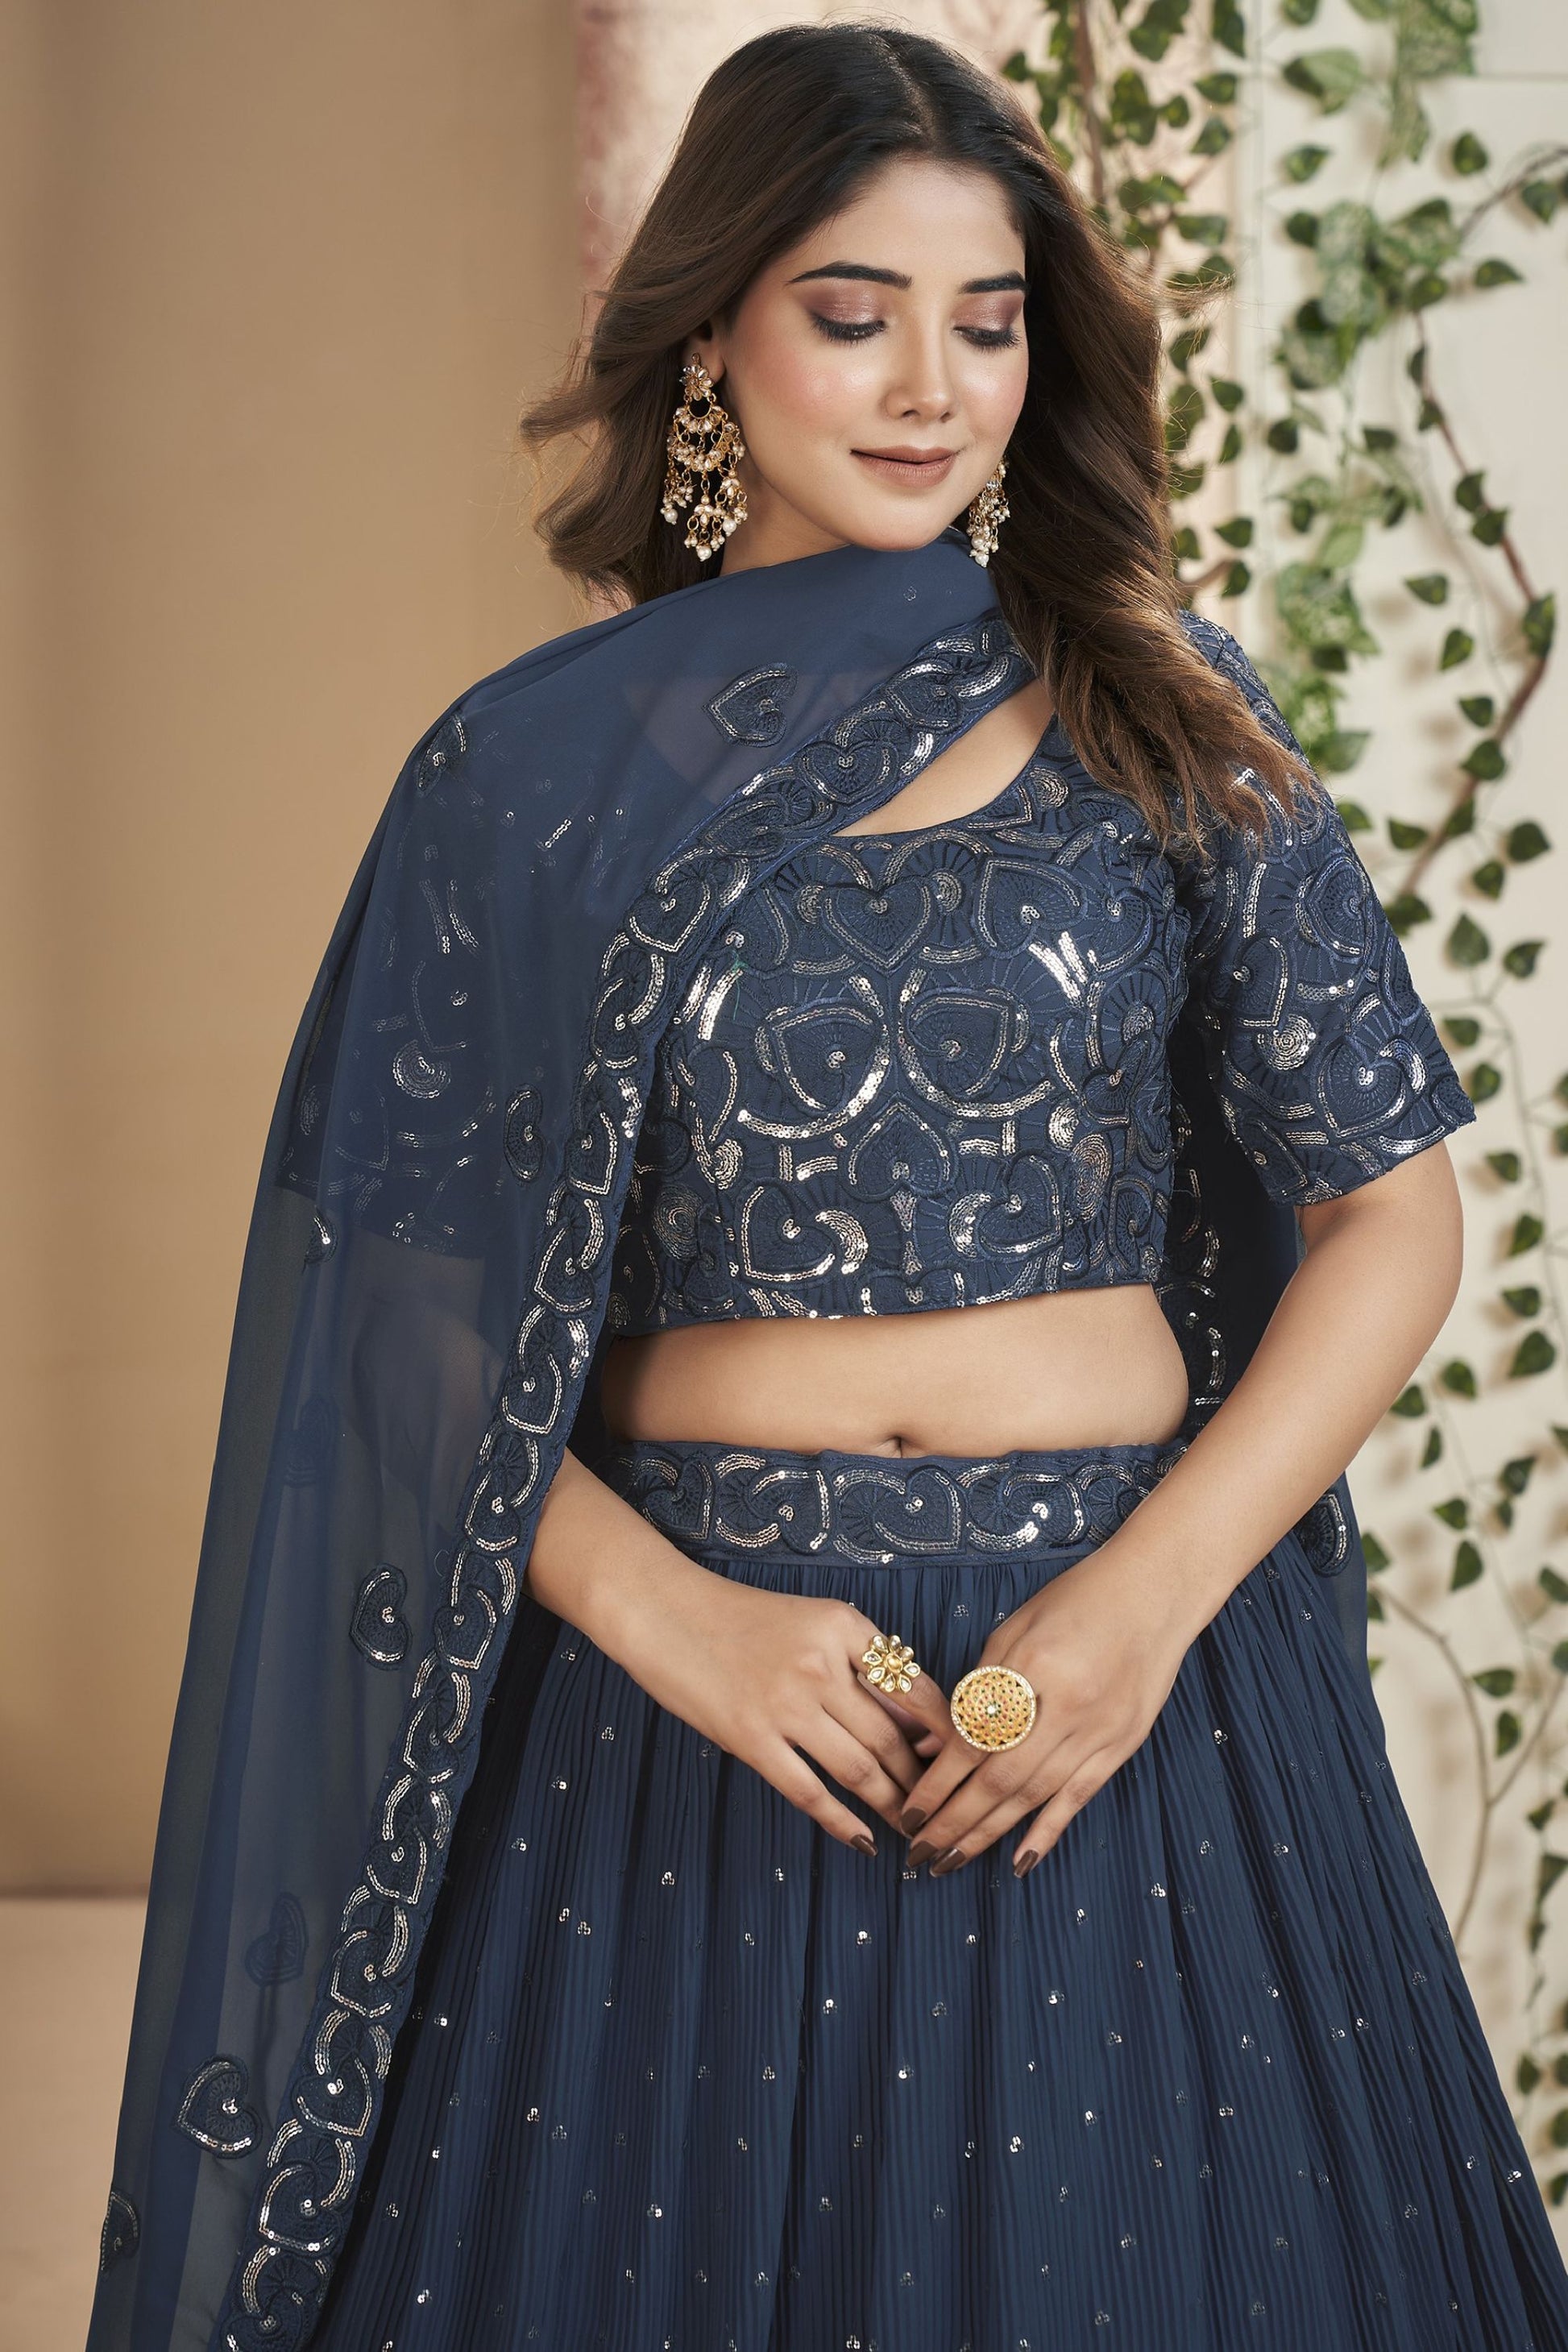 Blue Georgette Ruffle Lehenga Choli 9 Meter Flair For Indian Festivals & Weddings - Sequence Embroidery Work, Thread Embroidery Work,